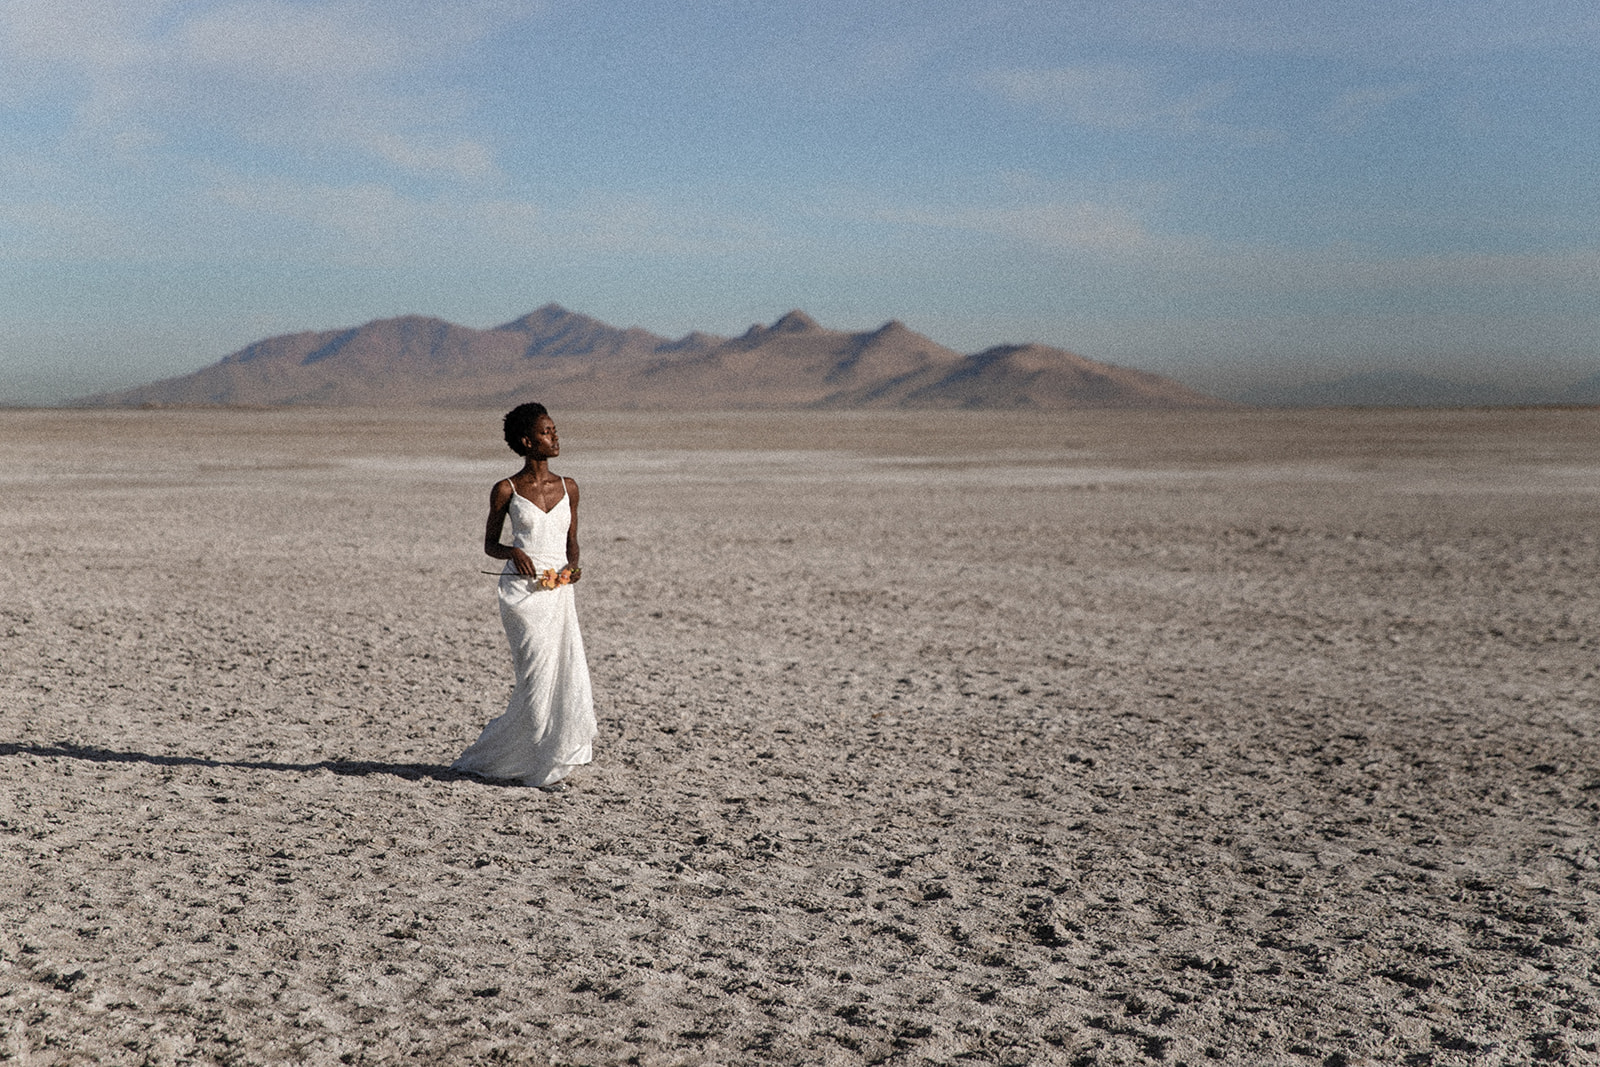 a person in a white dress in a desert